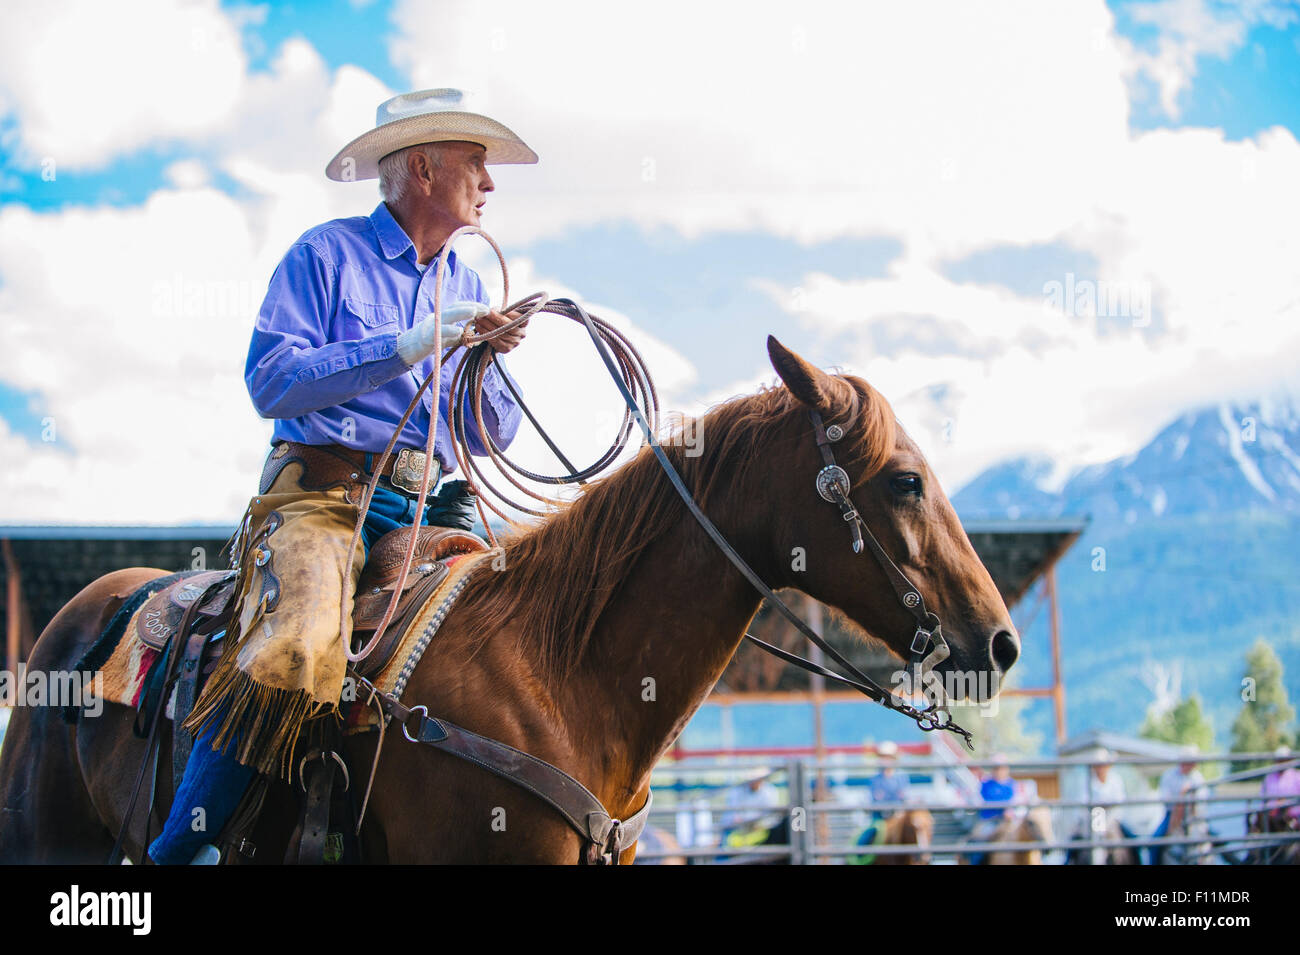 Older Caucasian cowboy riding horse at rodeo Stock Photo